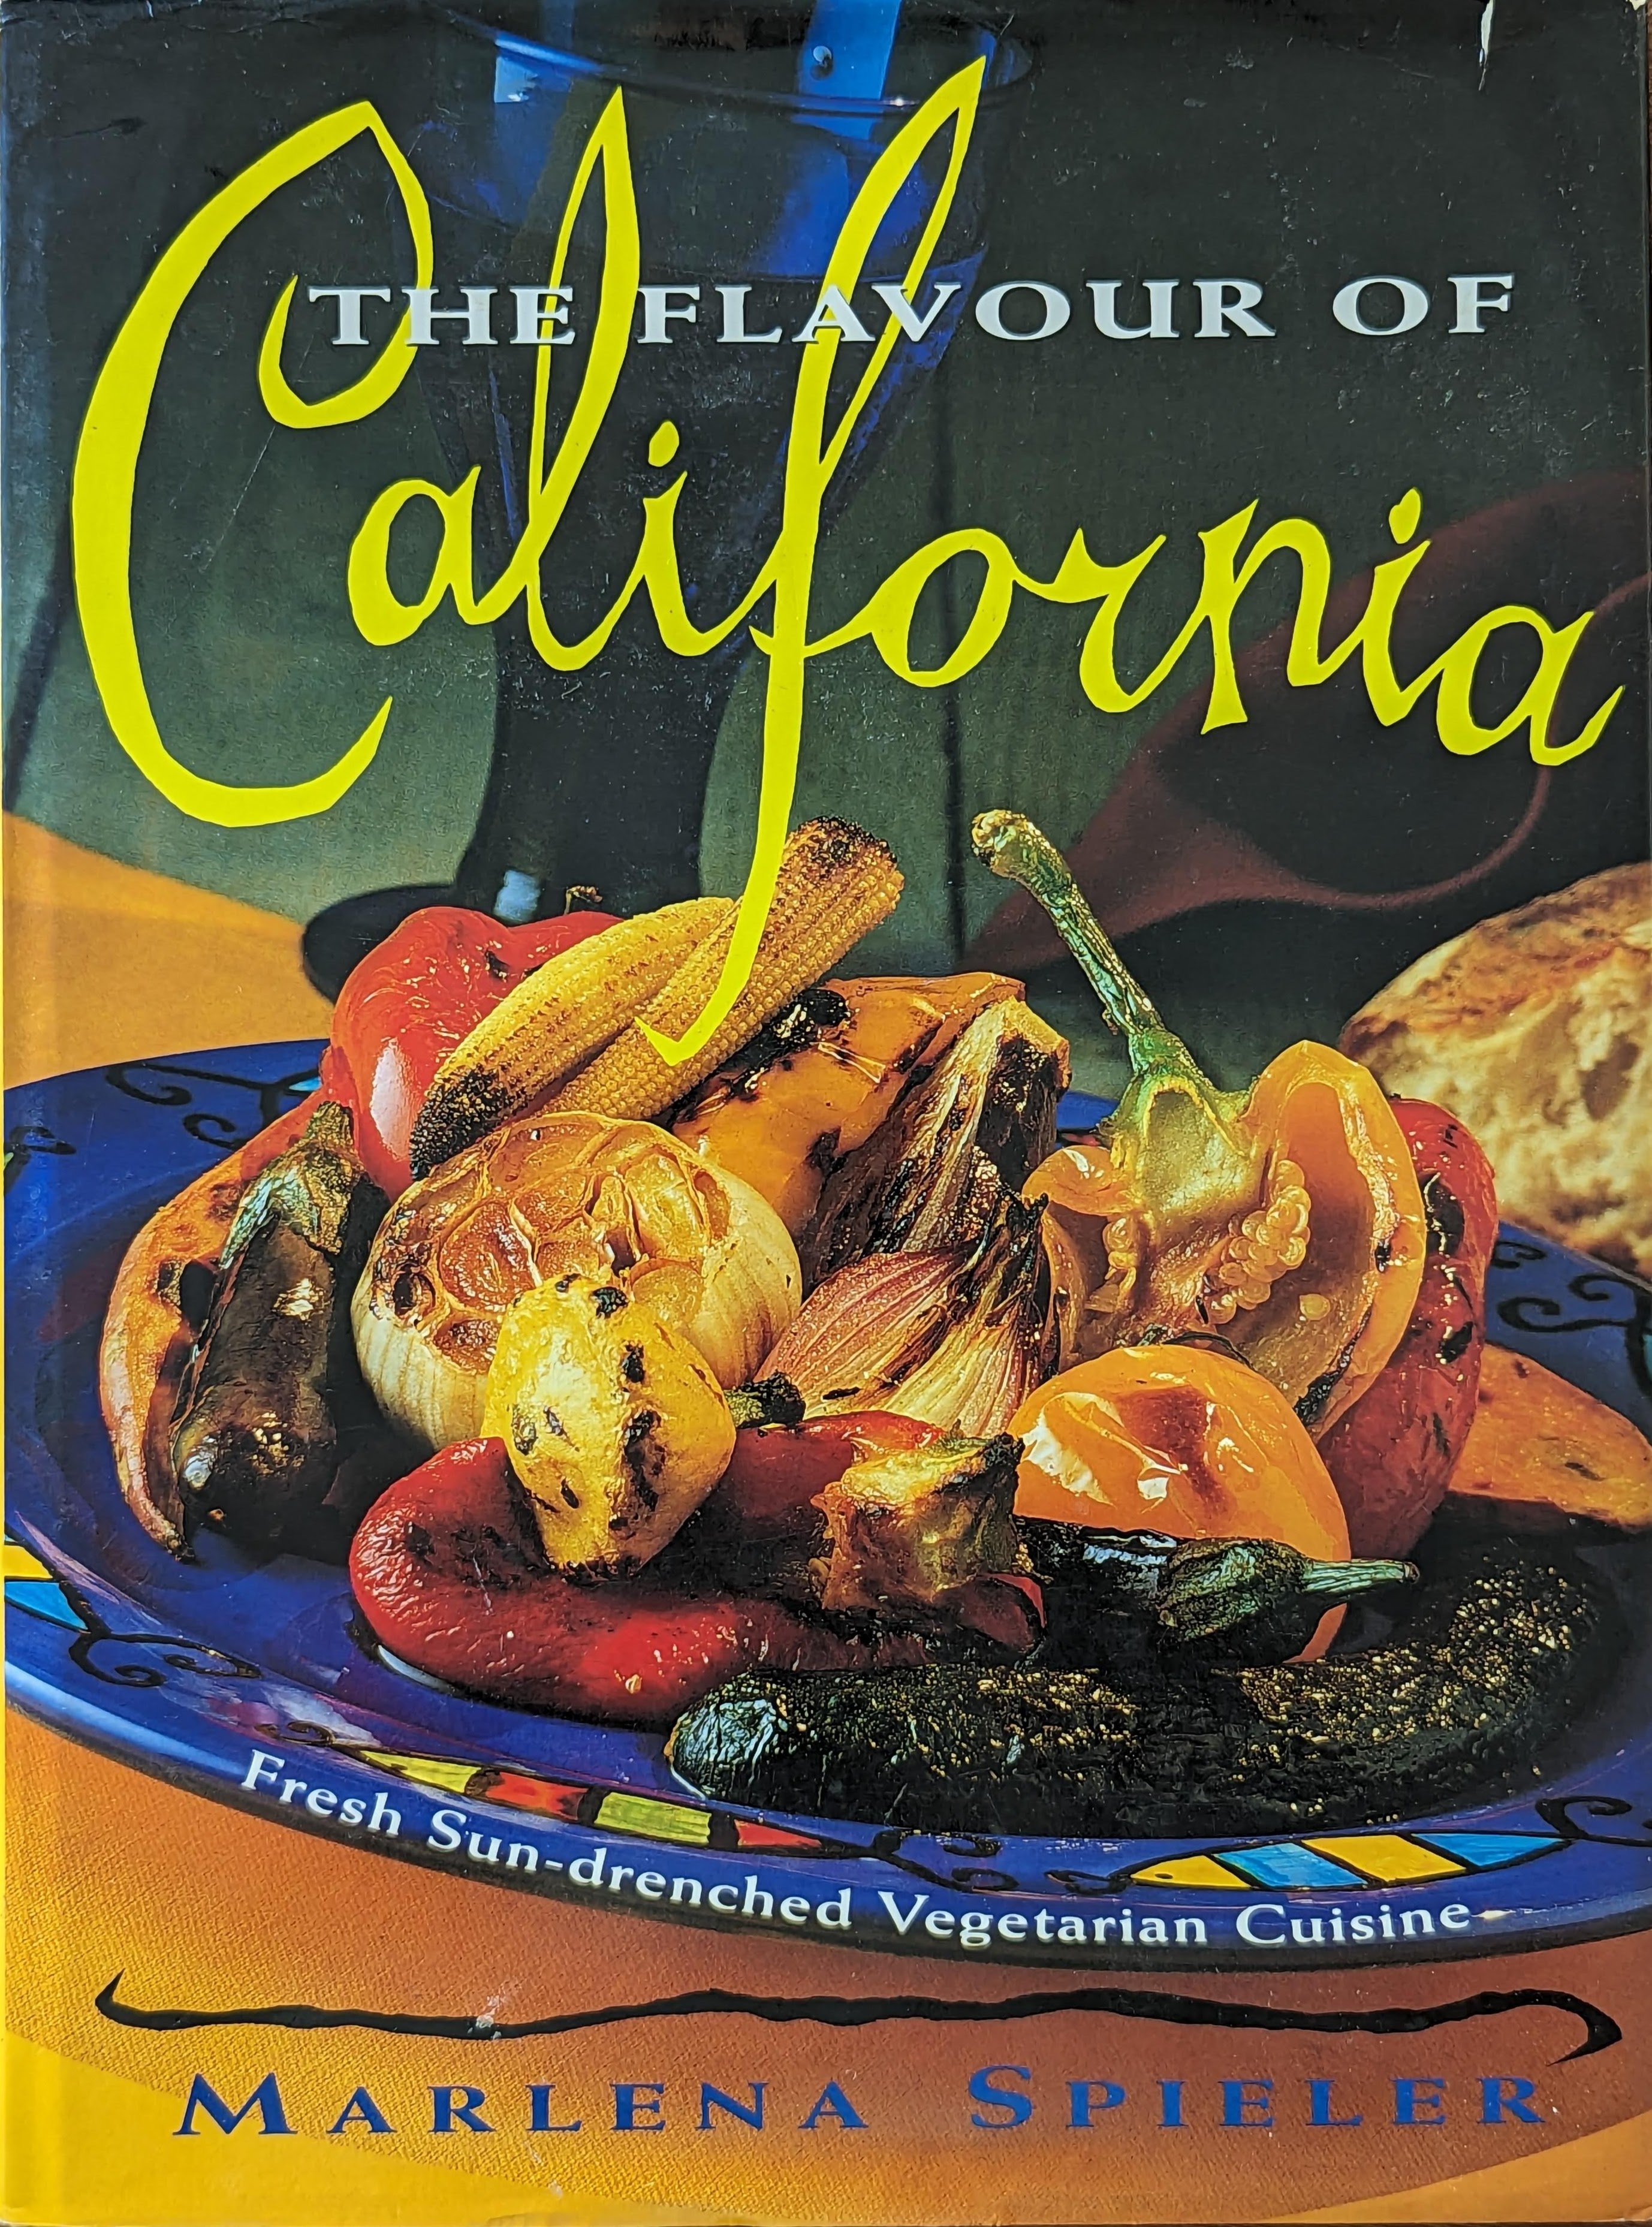 The Flavor of California: Fresh Vegetarian Cuisine from the Golden State, 1992